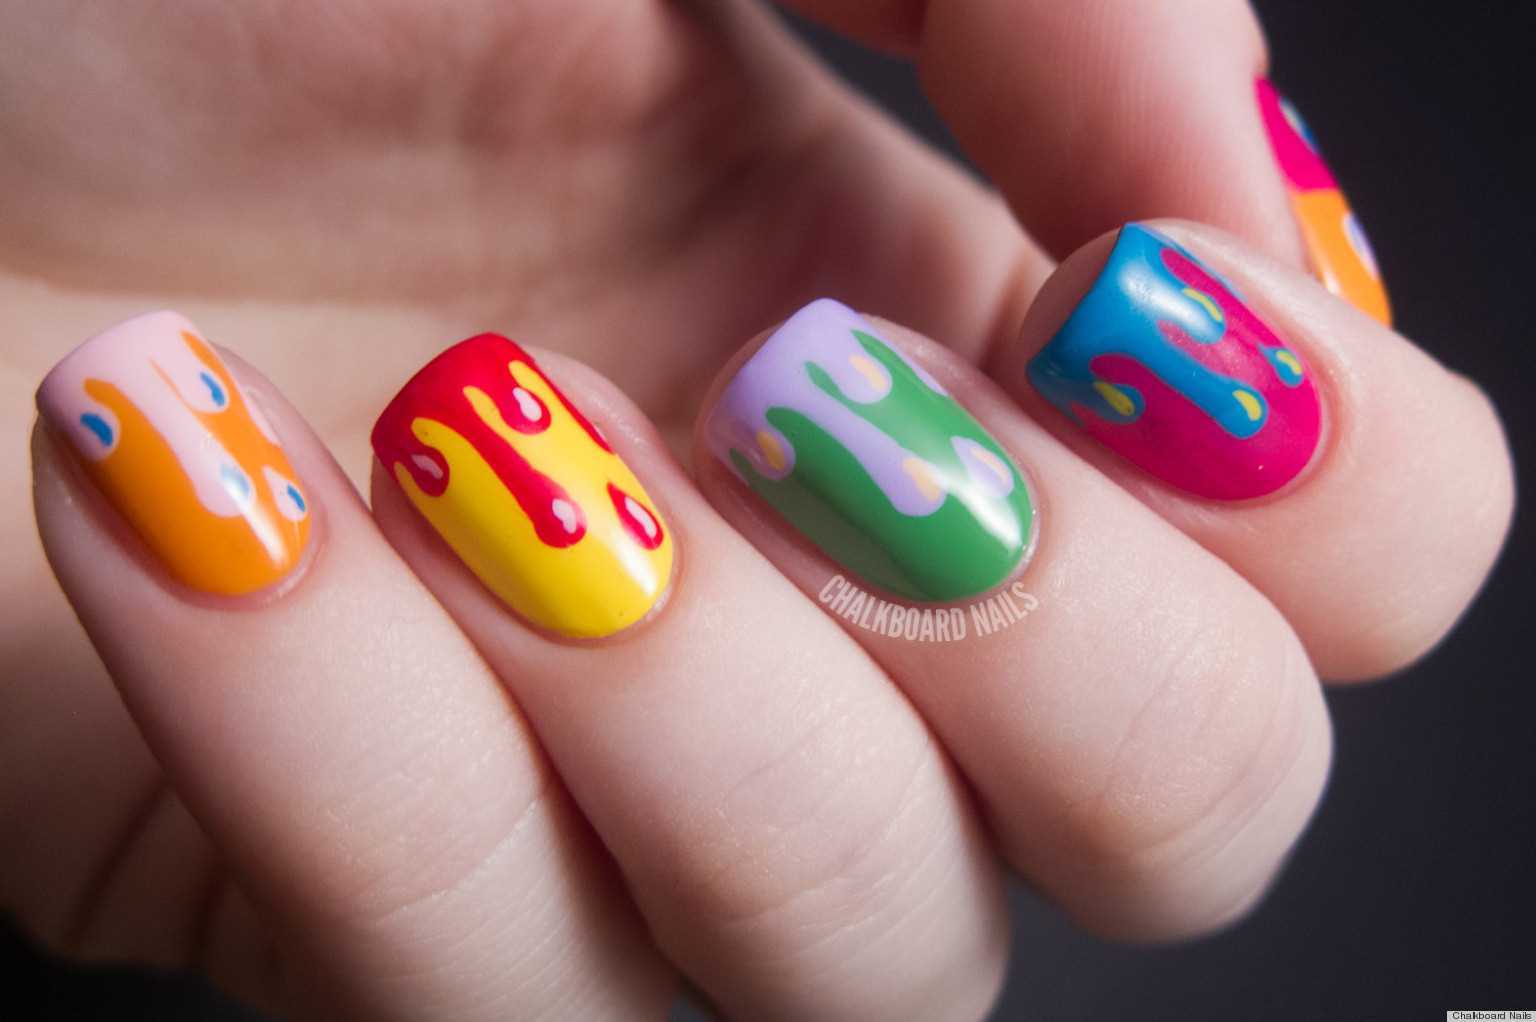 Ascent Your Short Nails with Colorful Chic Nail Art Designs